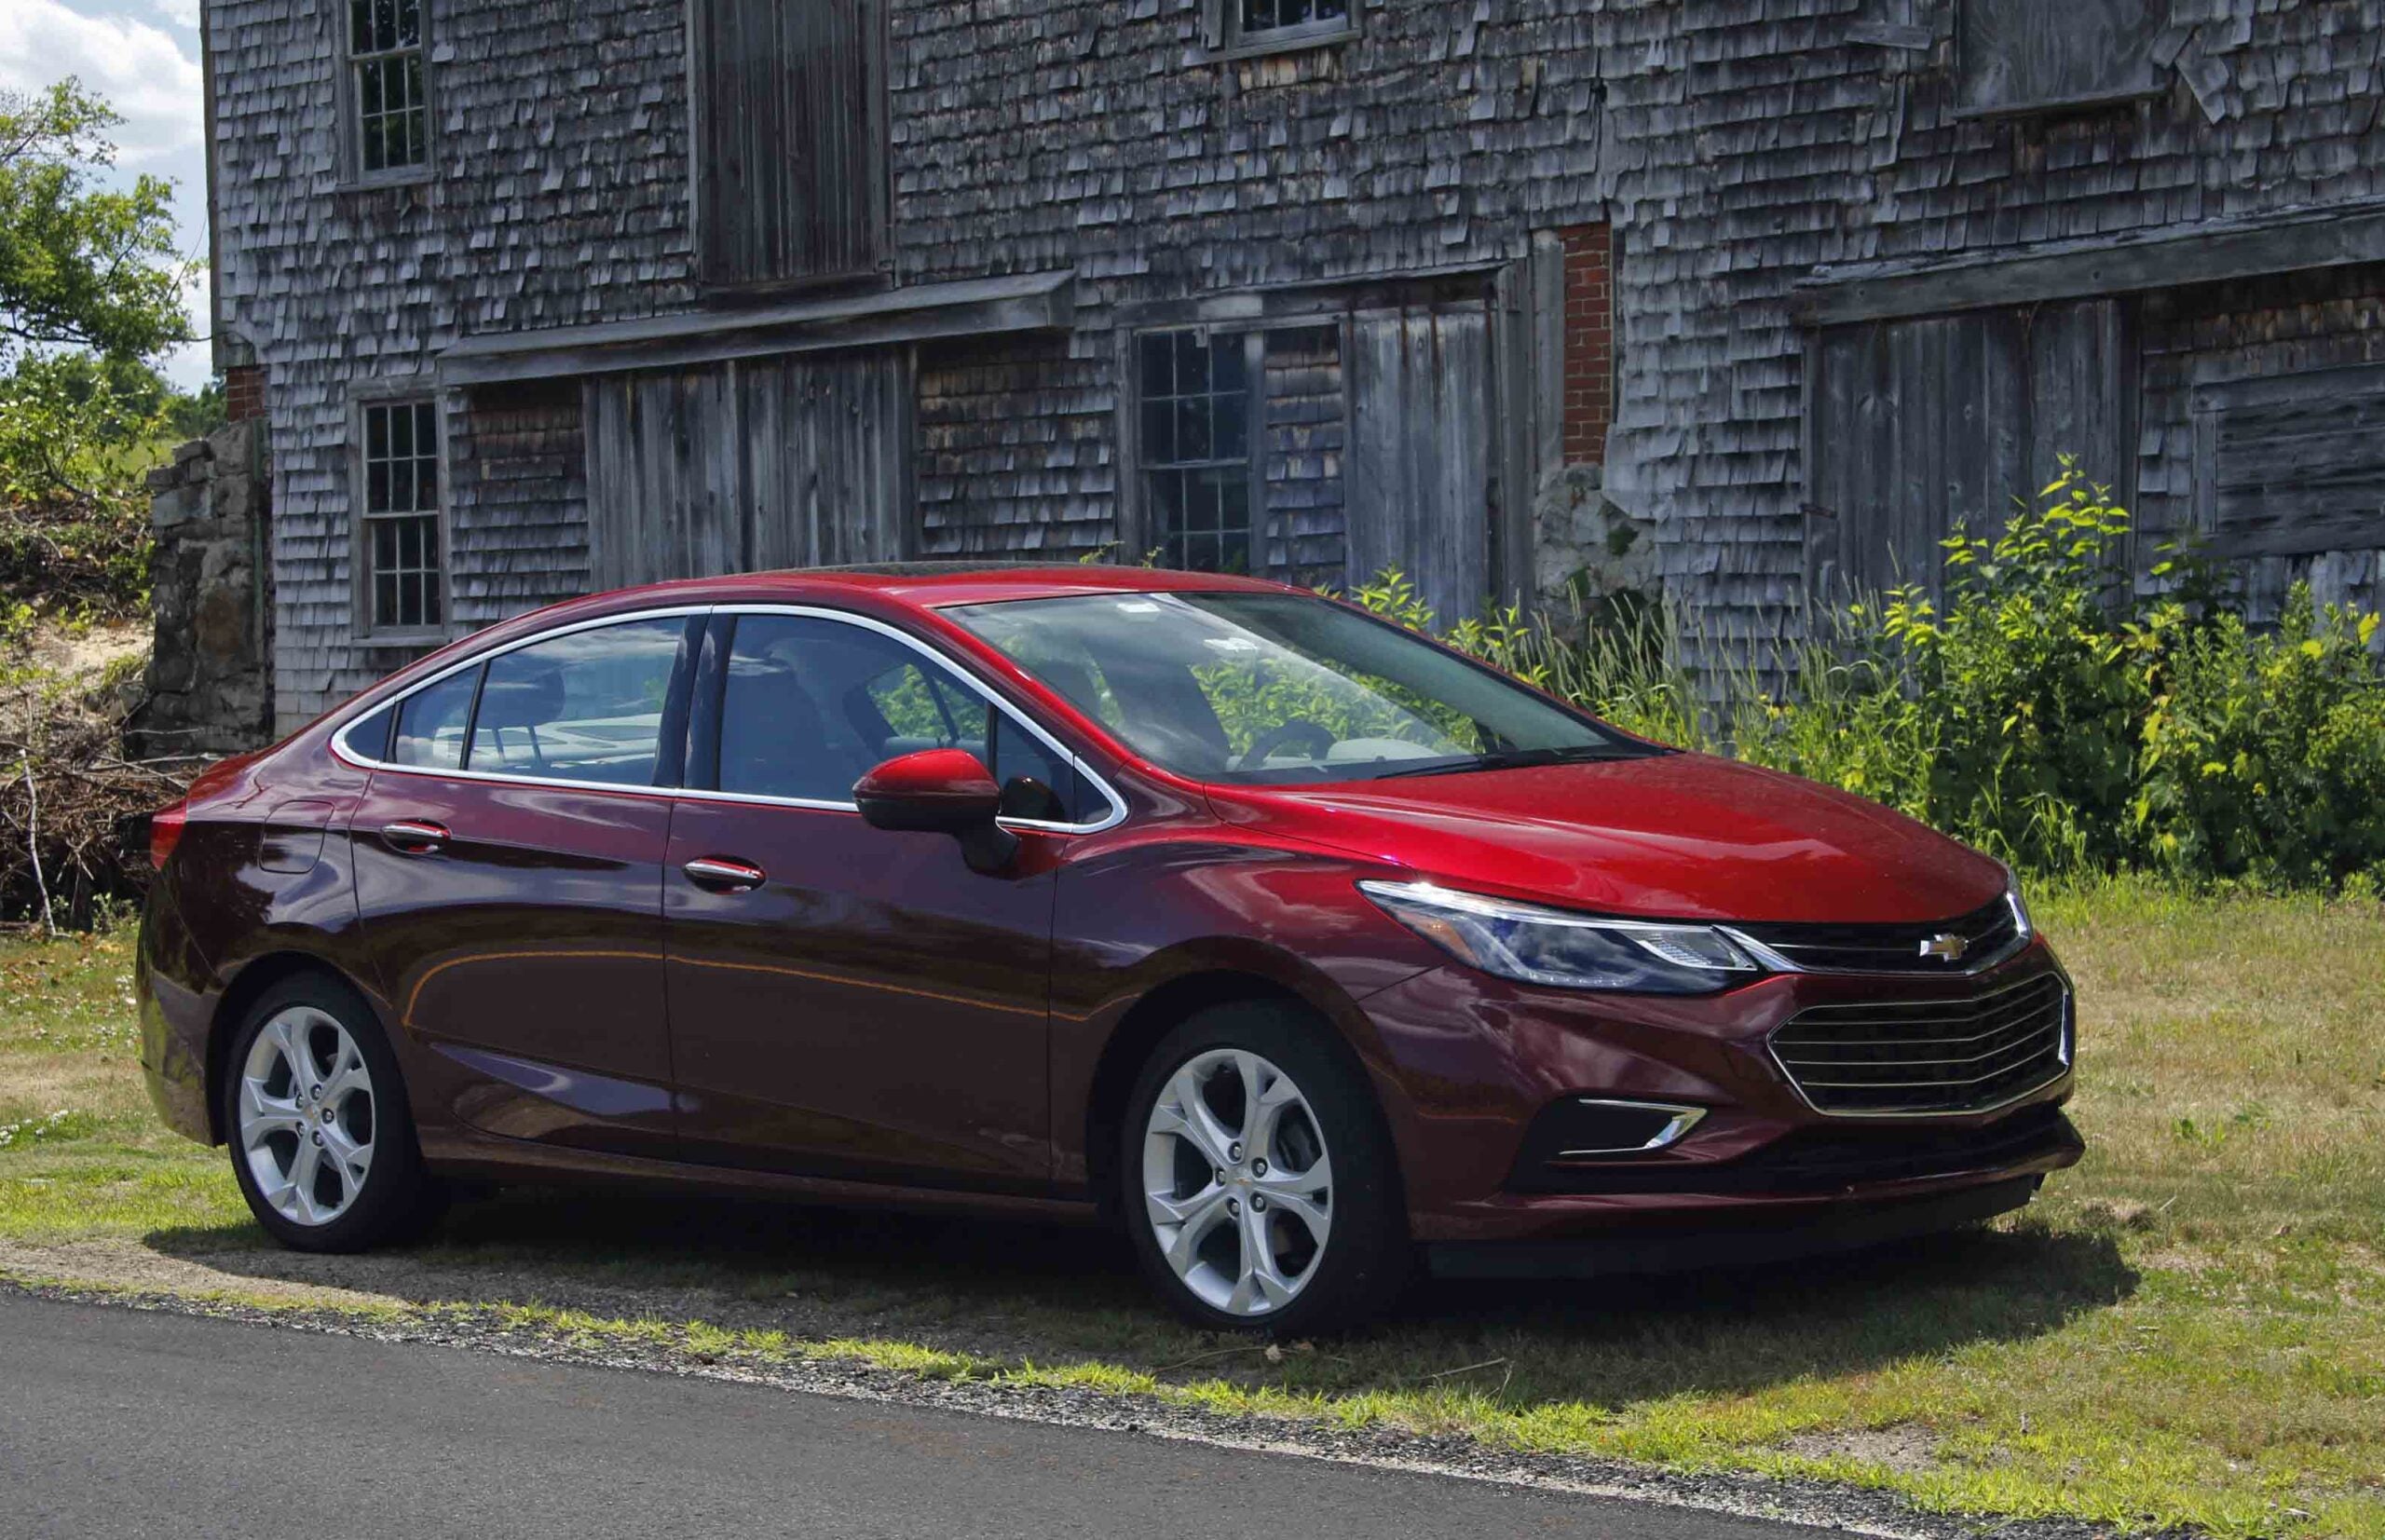 Review: The Chevy Cruze turns in a solid performance on the road